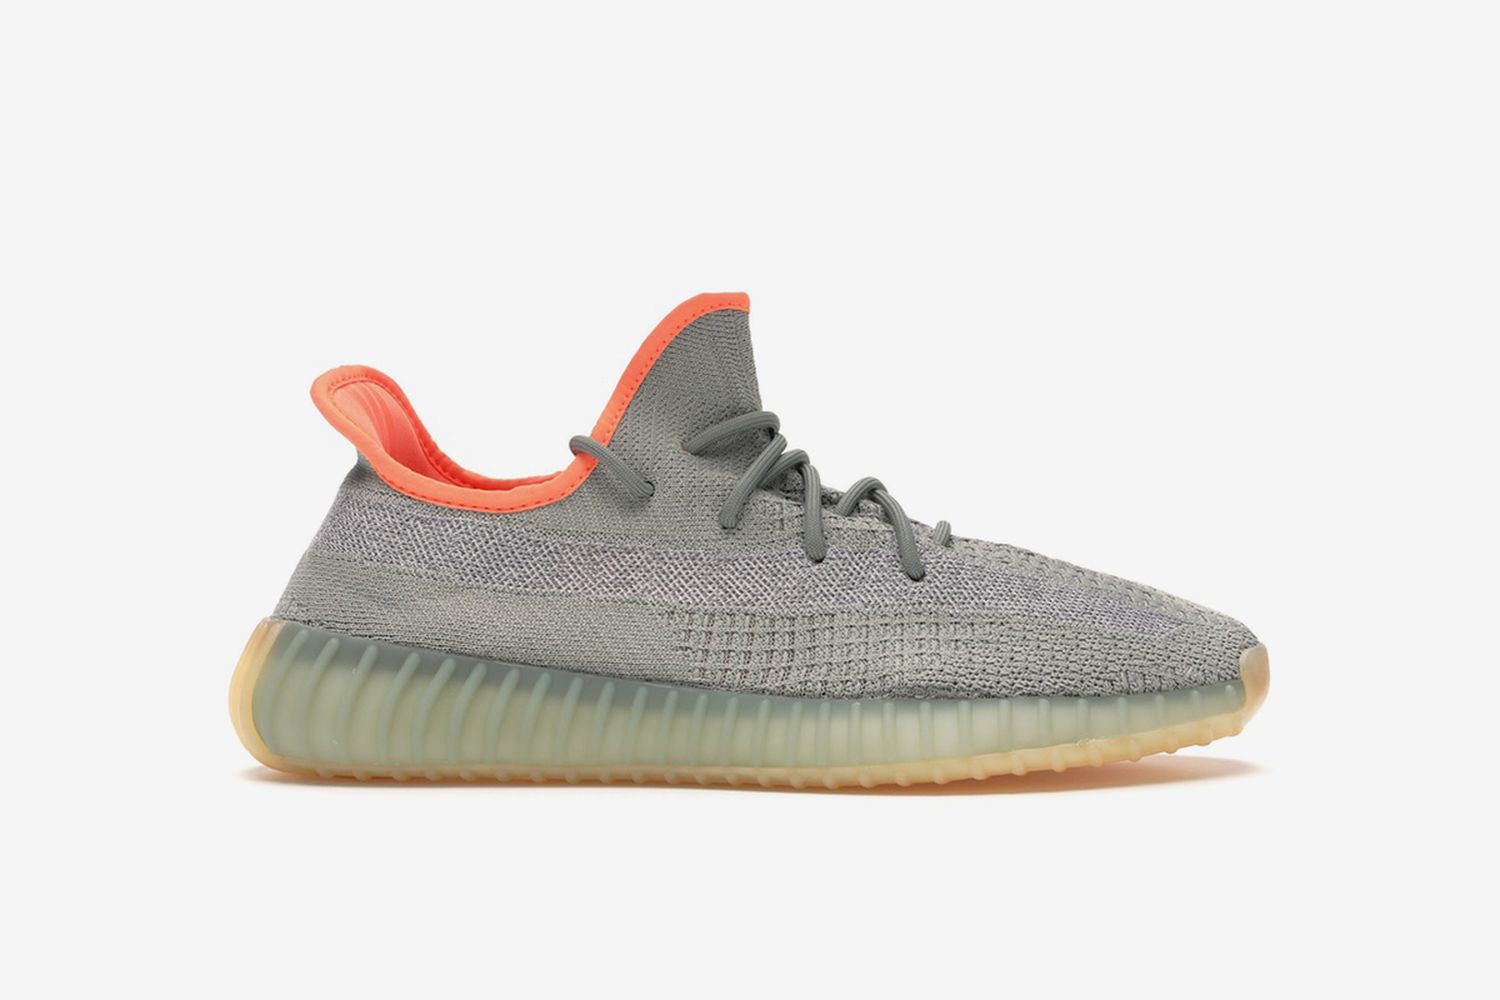 Resale Info for the YEEZY Boost 350 V2 